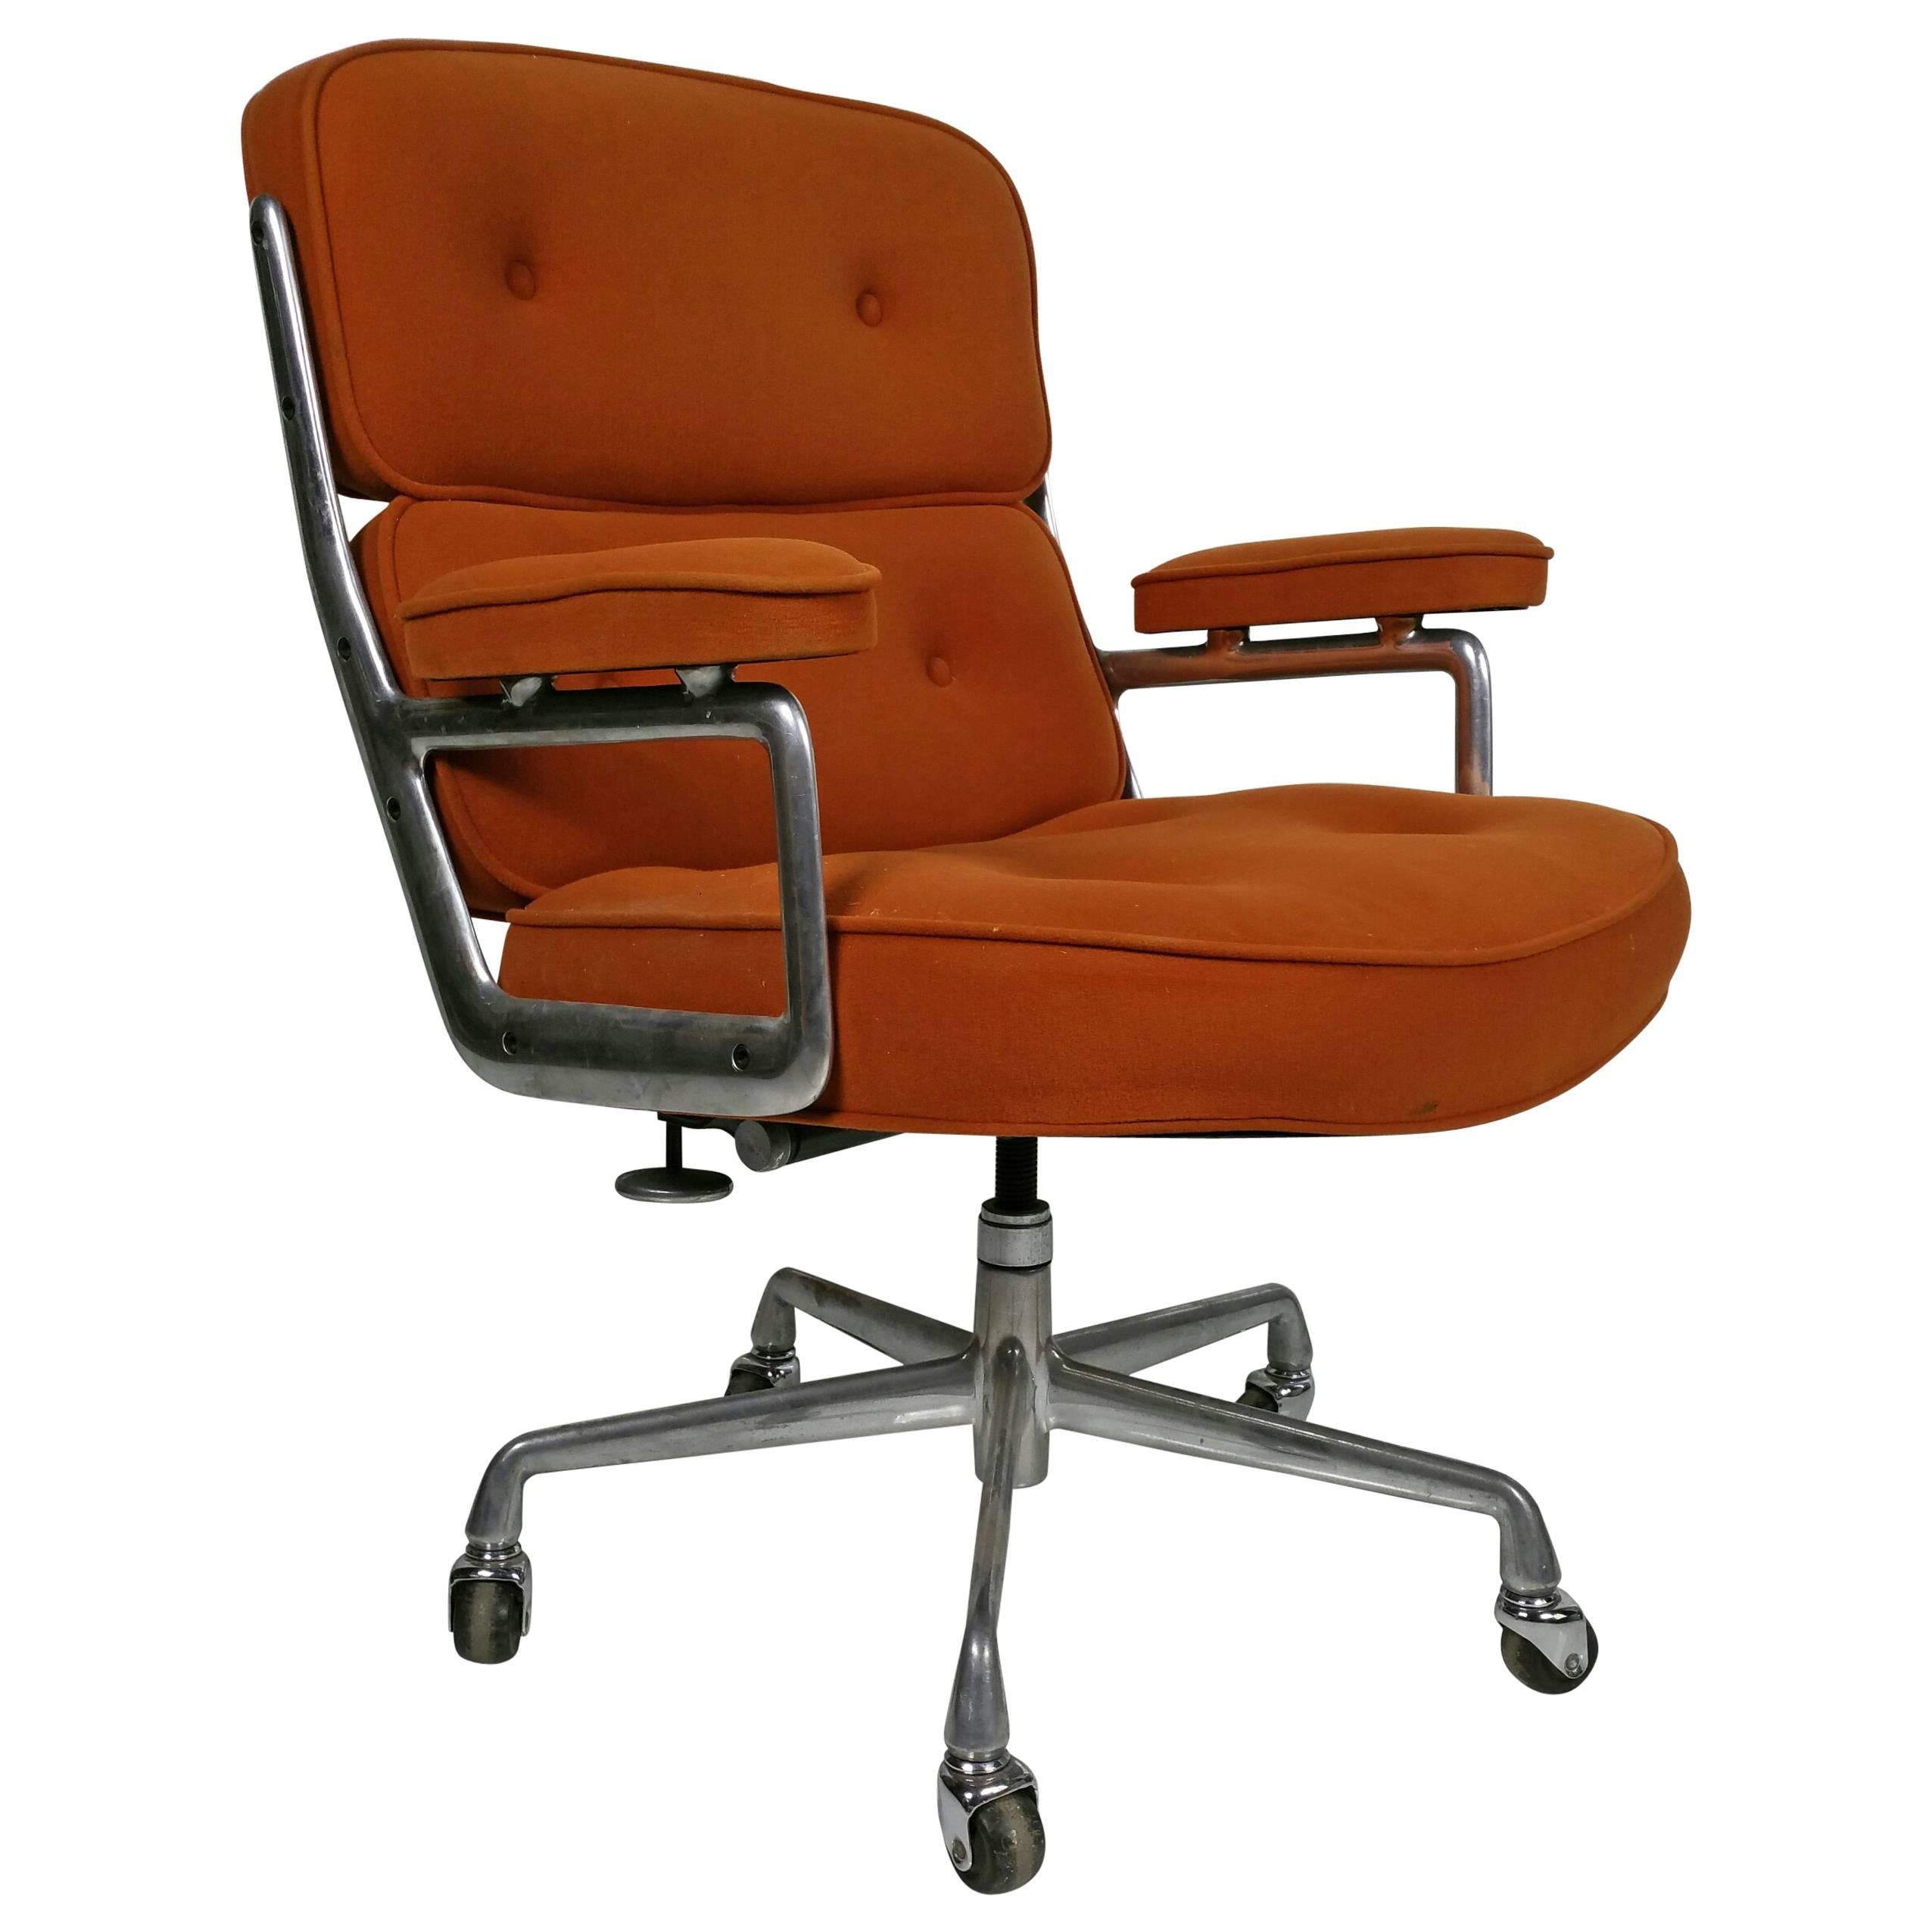 Charles and Ray Eames Time Life Chair, Herman Miller